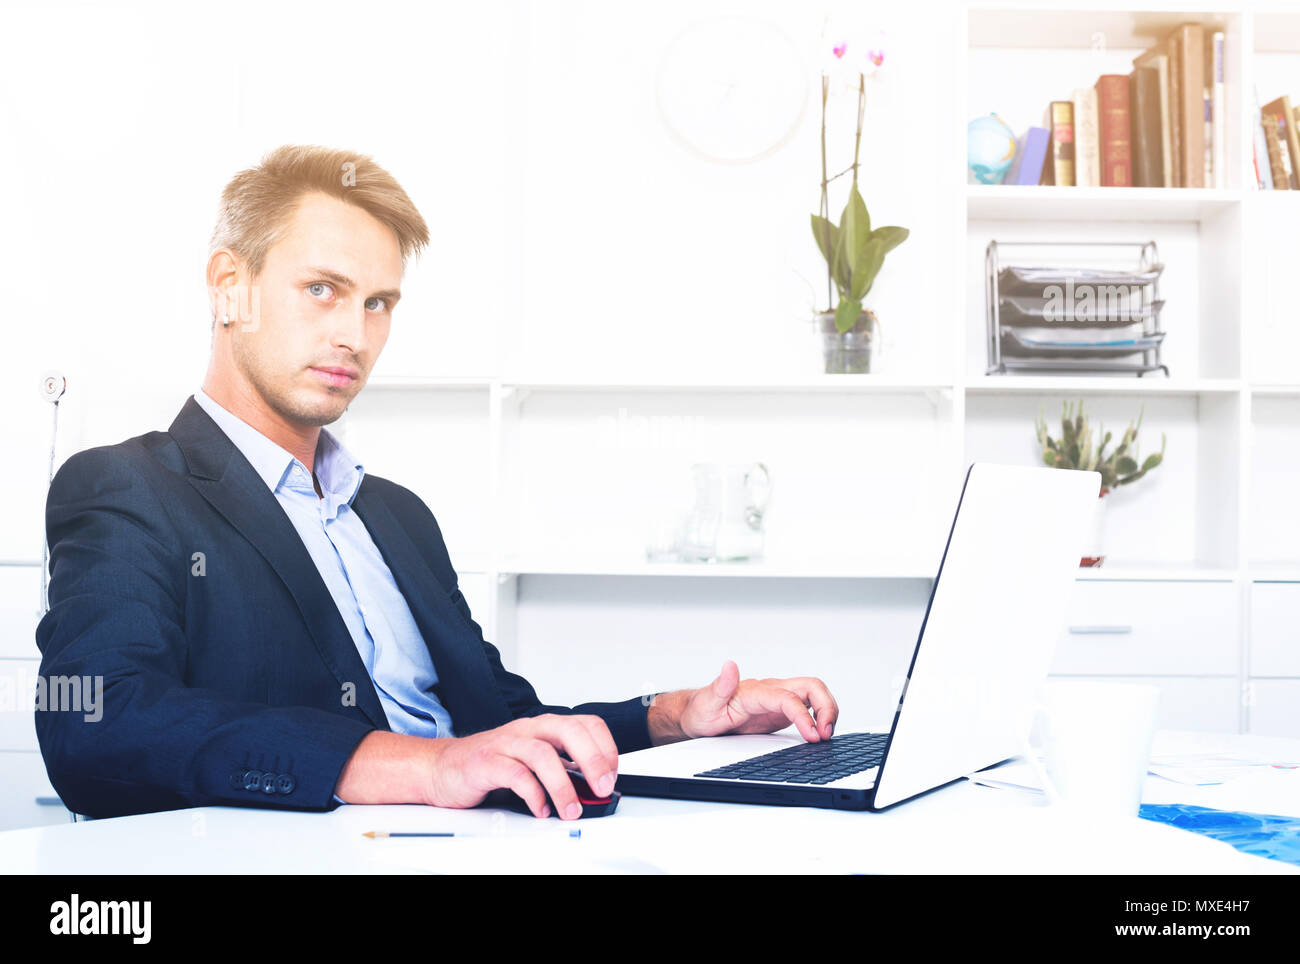 Serious Young Man Employee Sitting At Working Desk With Laptop In